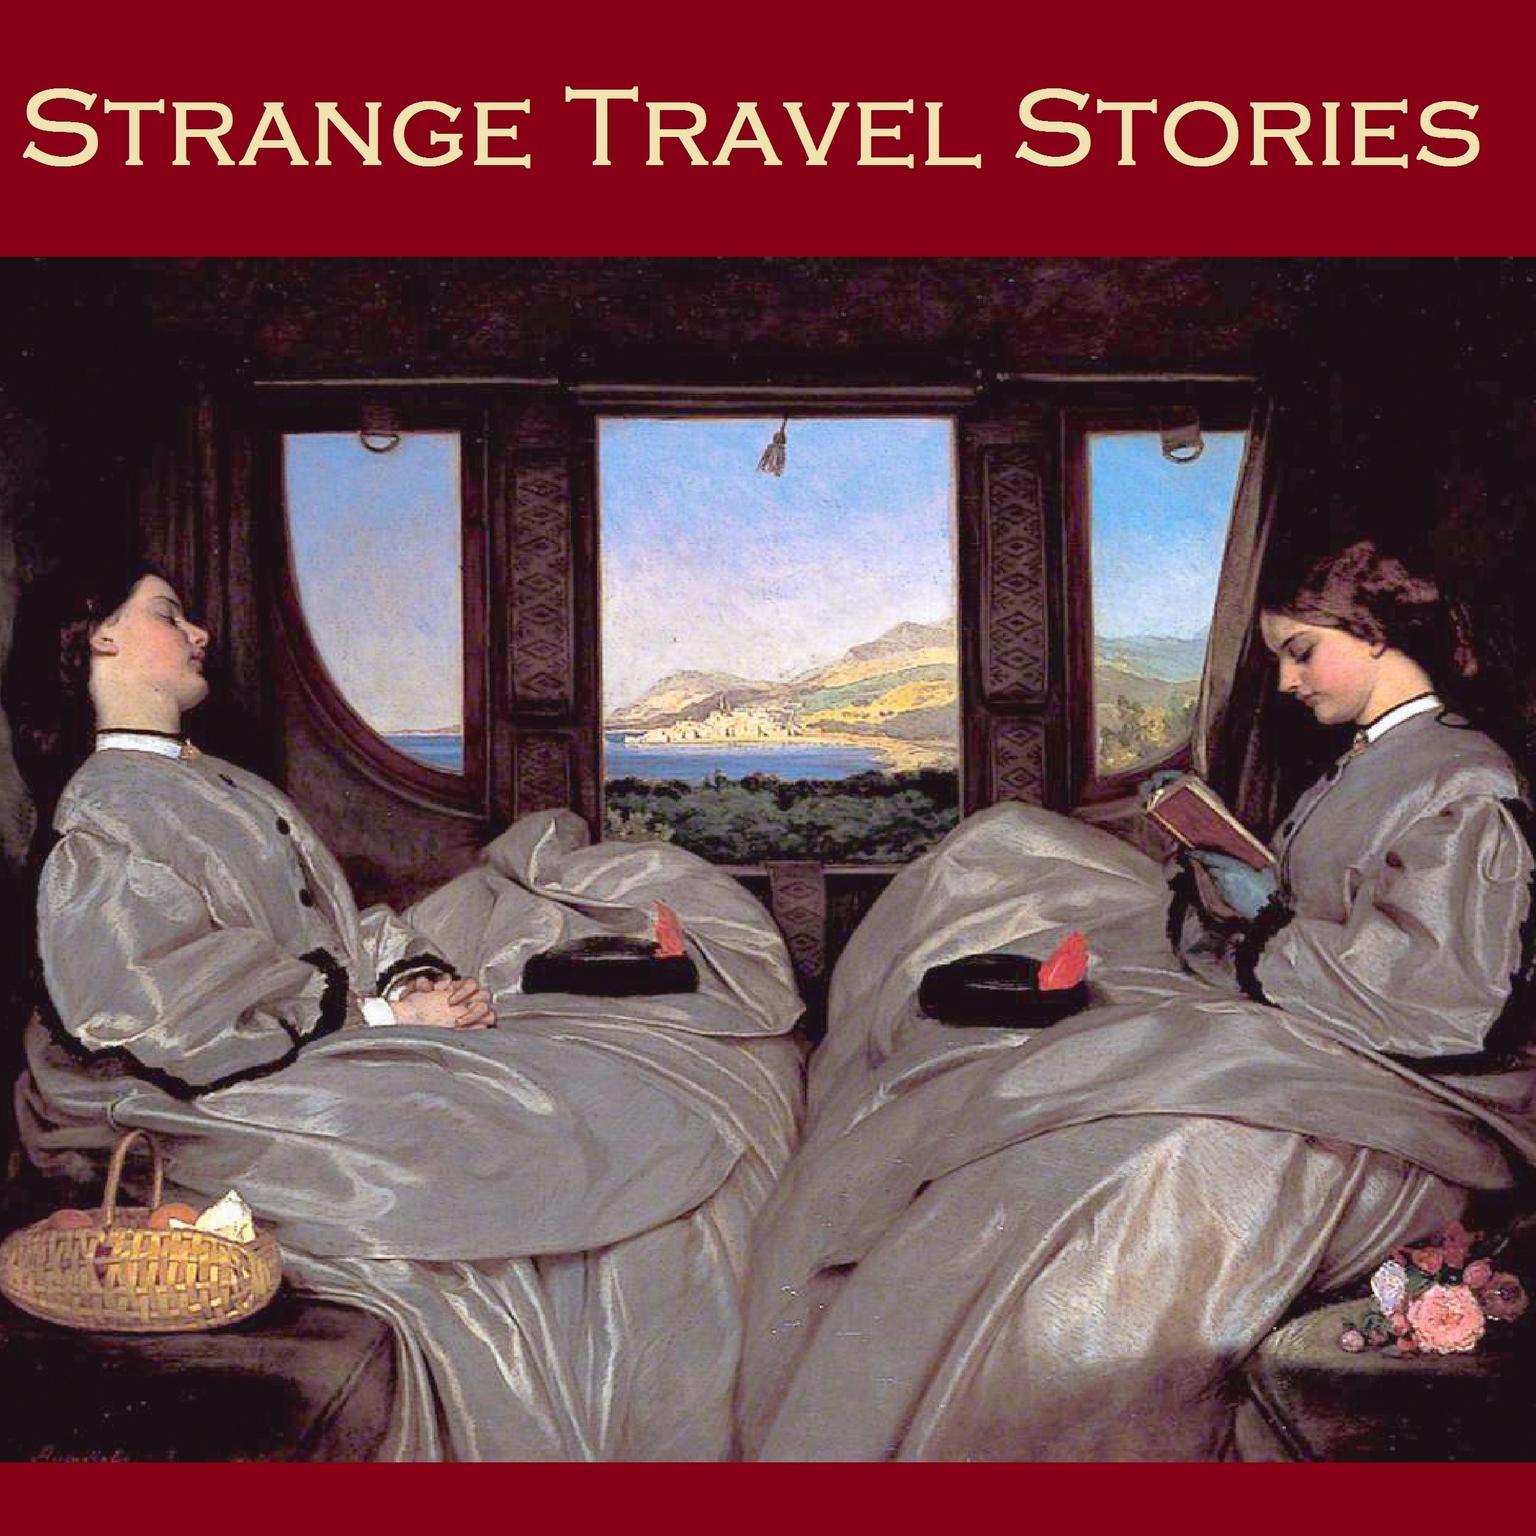 Strange Travel Stories Audiobook, by various authors